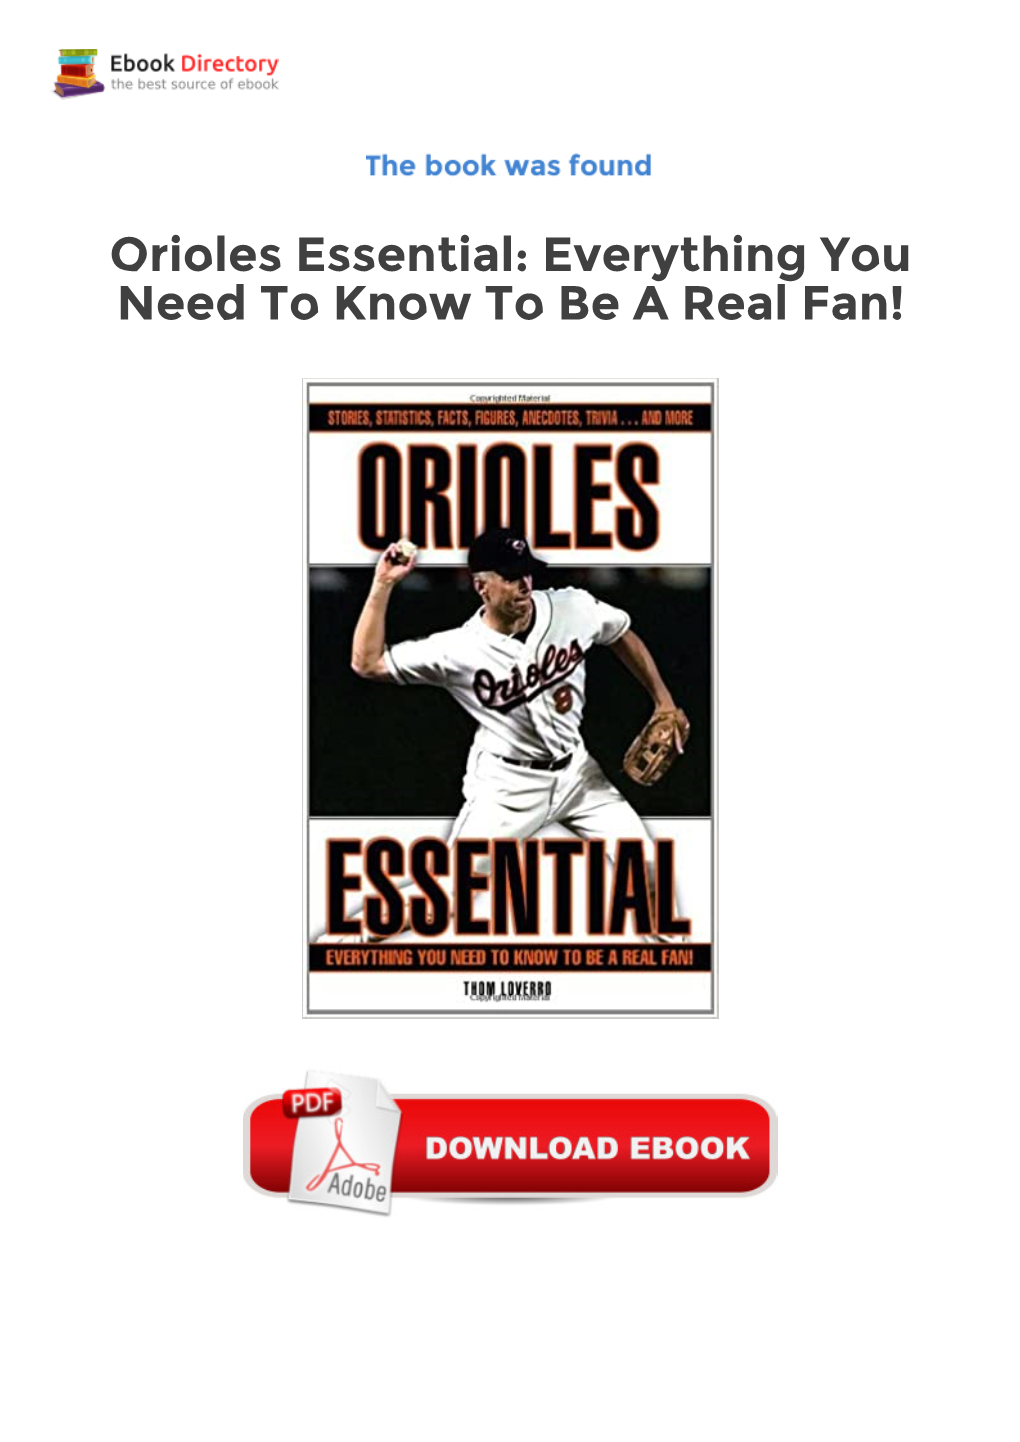 Orioles Essential: Everything You Need to Know to Be a Real Fan